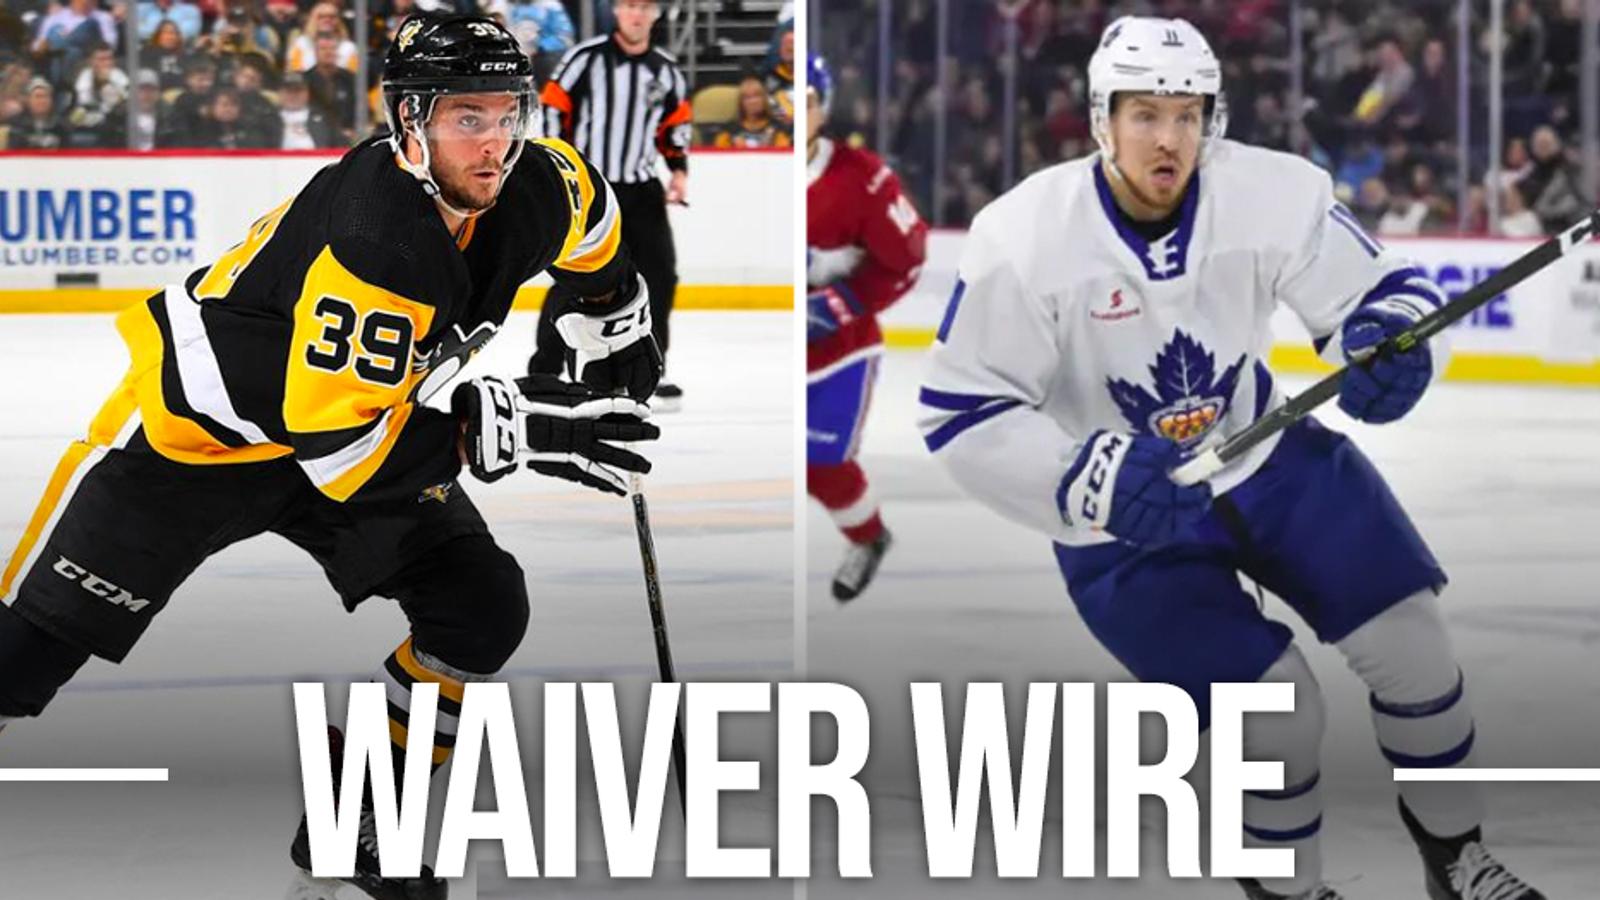 Dea and Kossila clear waivers, then three other NHLers placed on waivers